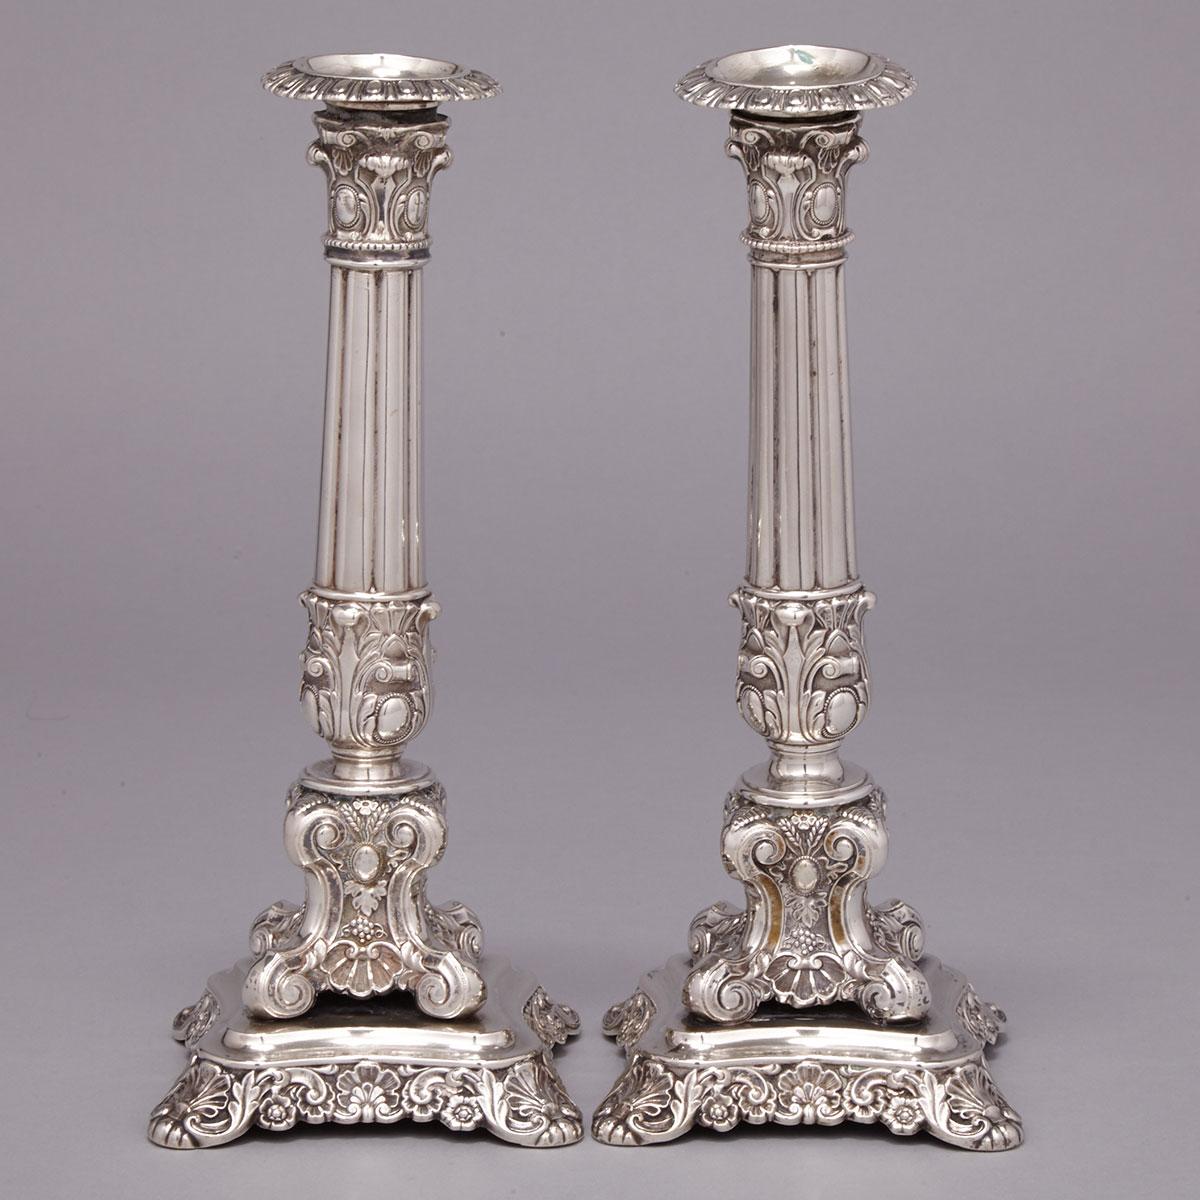 Pair of Continental Silver Candlesticks, 19th century